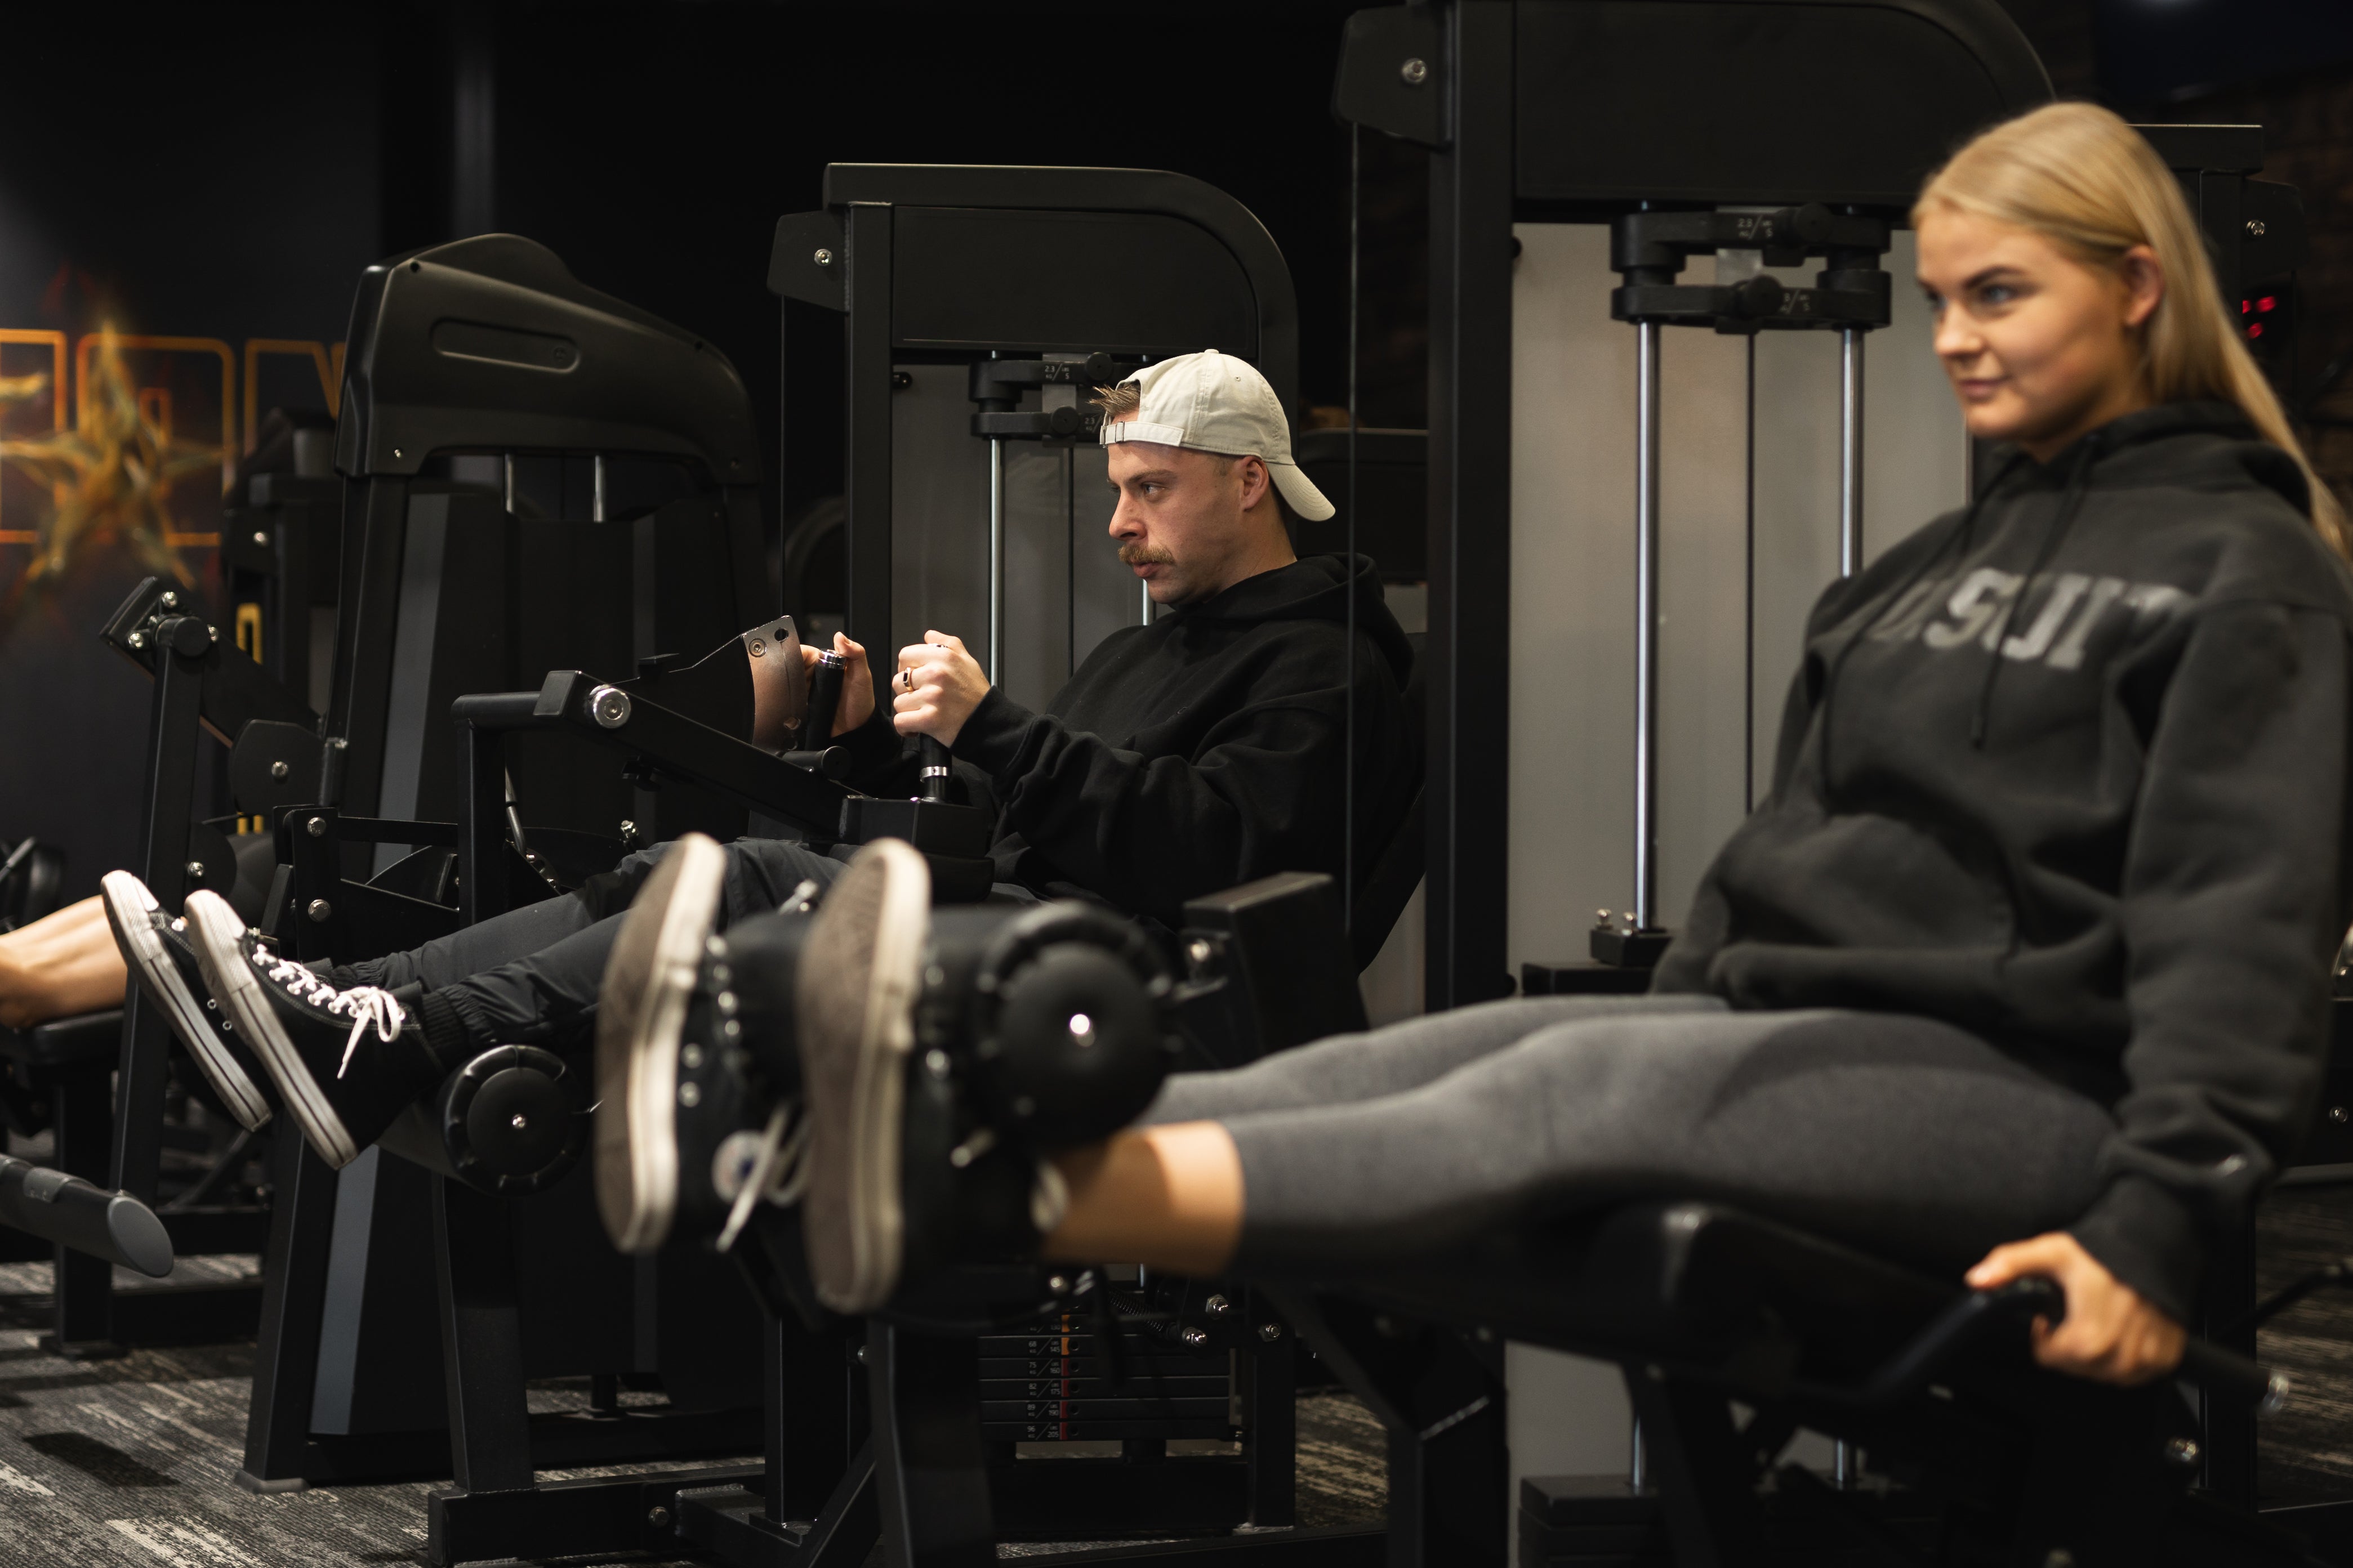 Members of Inception Gym working out on leg extension machines